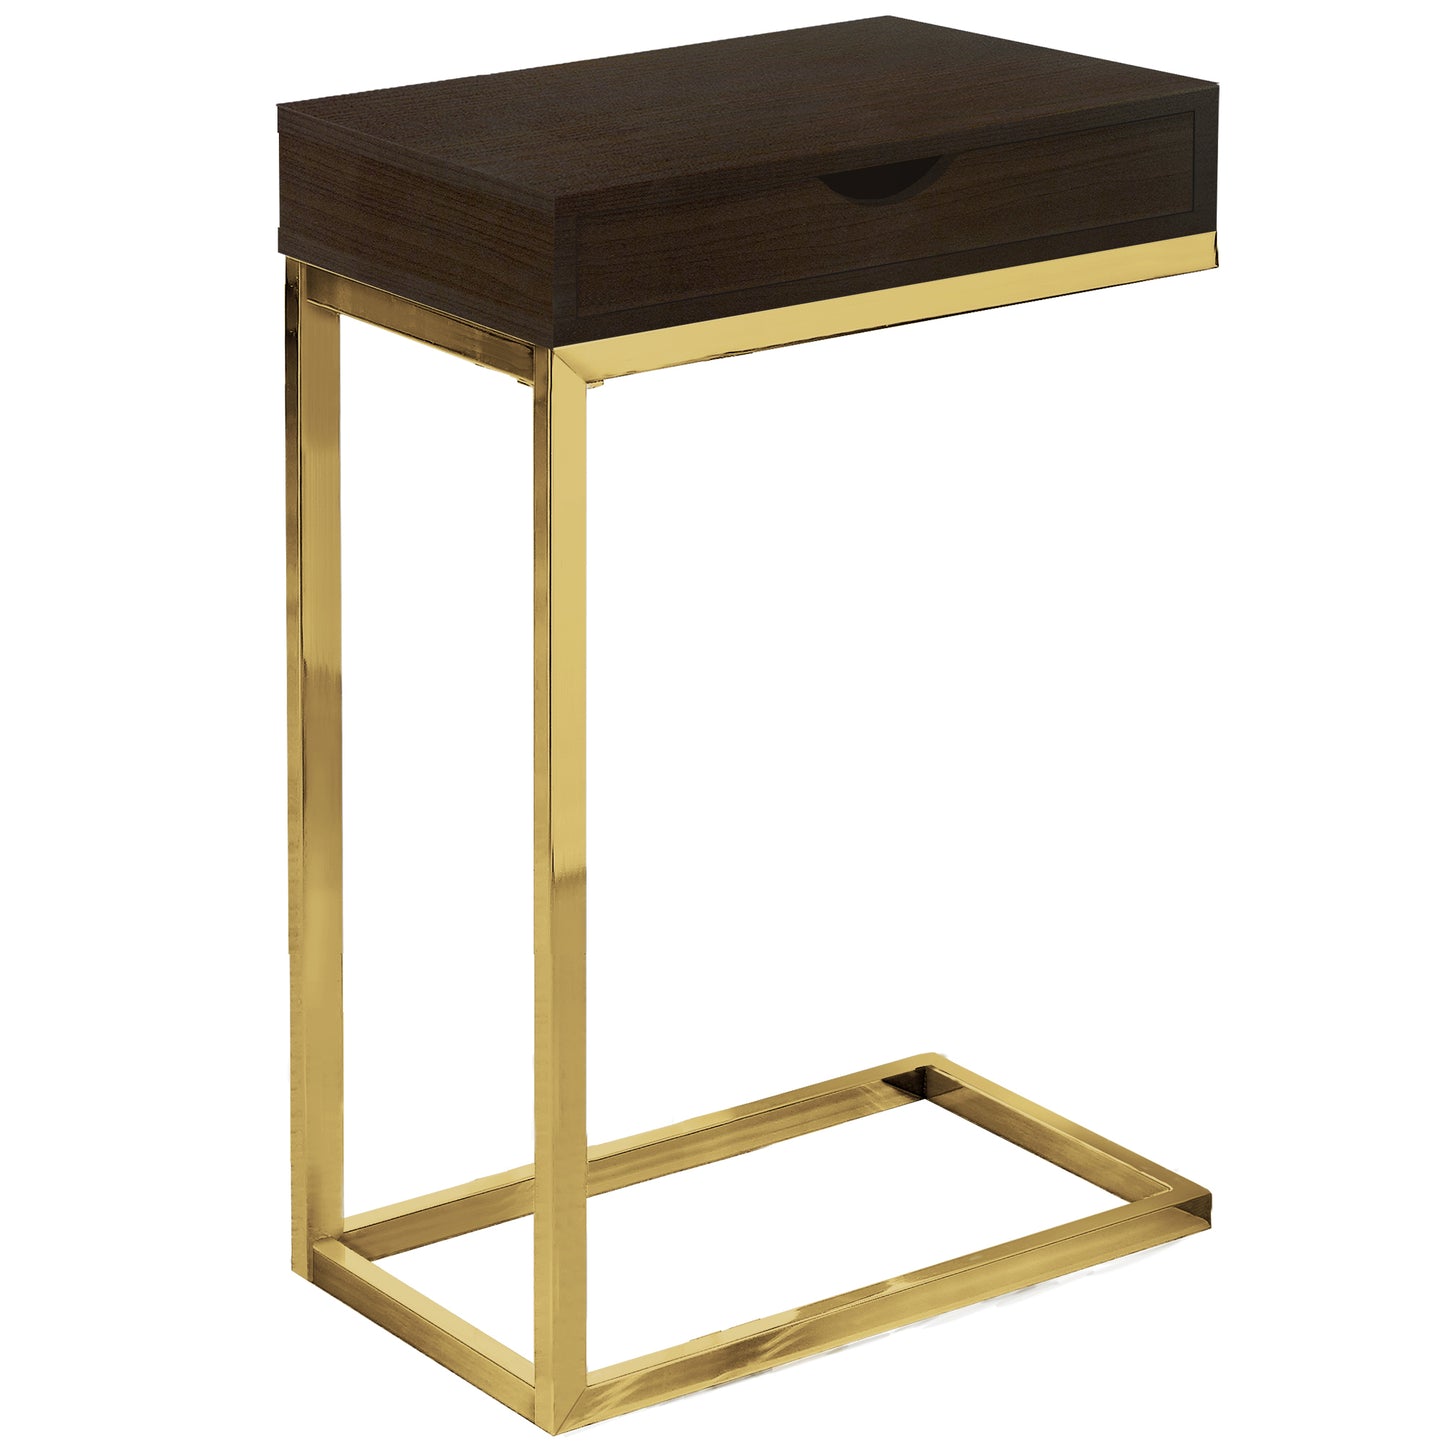 10.25" x 15.75" x 24.5" Cappuccino Finish and Gold Laminated Drawer Accent Table